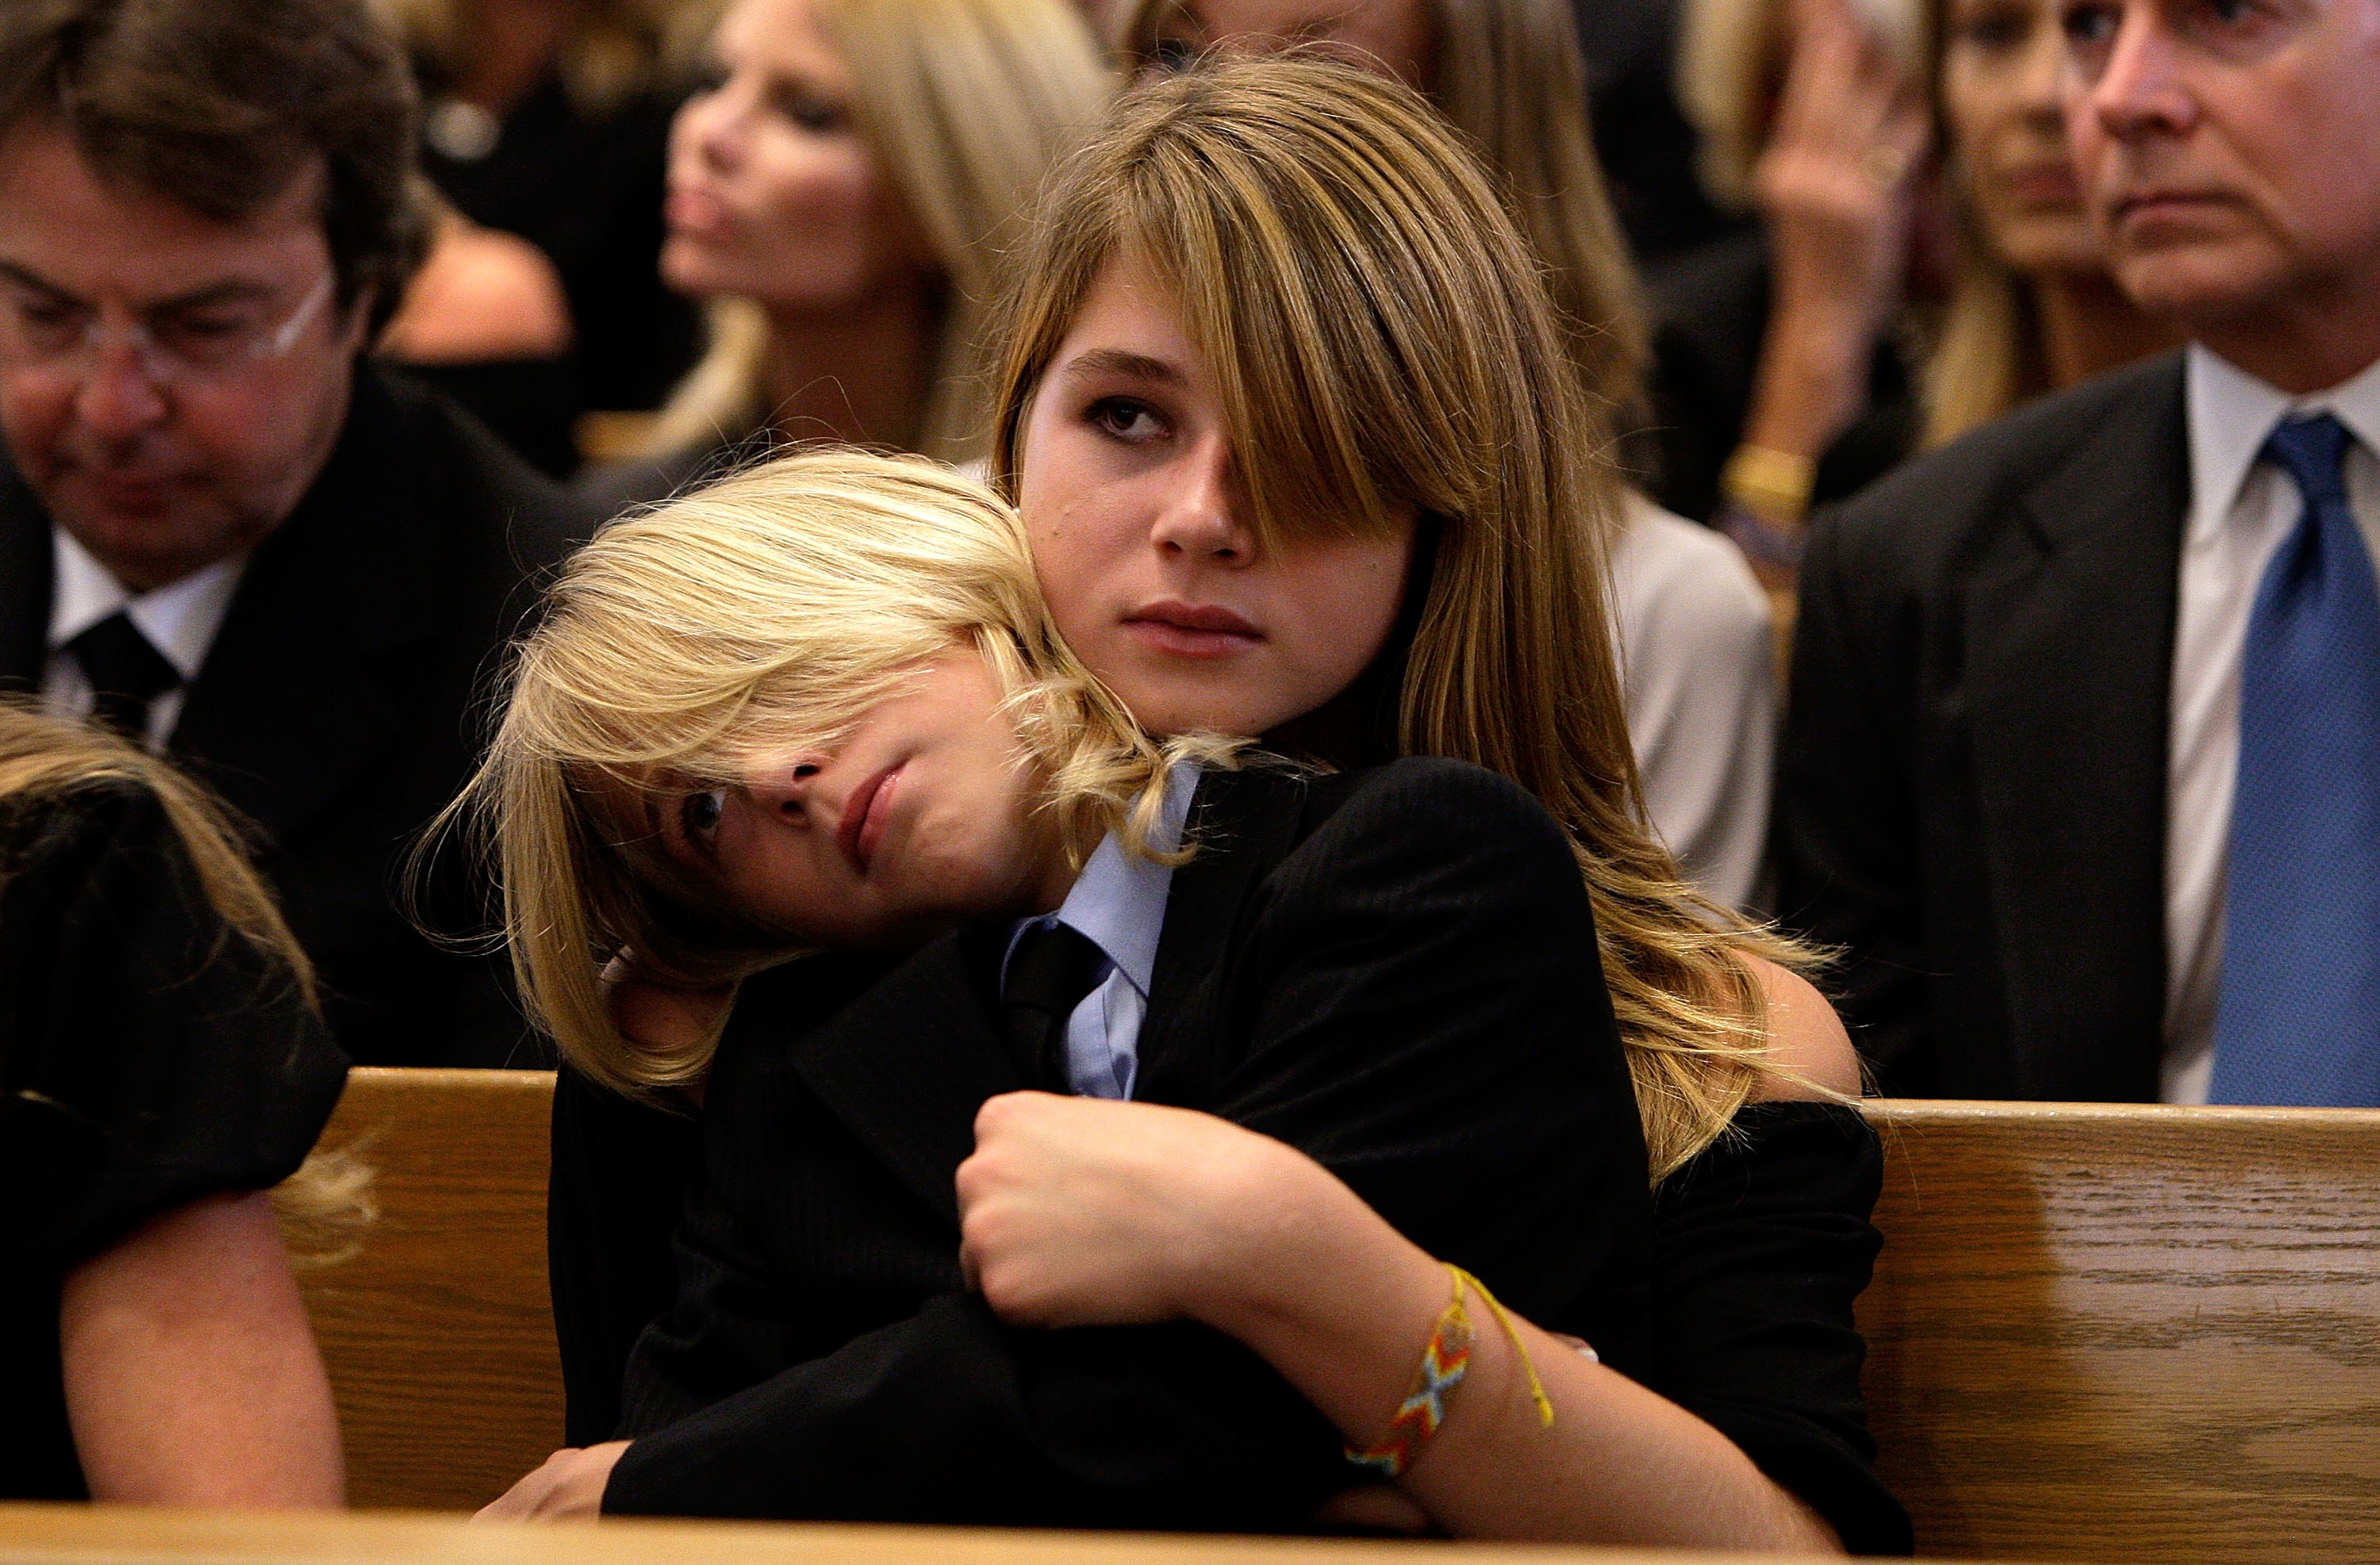 Donovan Mervyn and Farah Griffin at their grandfather, Merv Griffin's funeral in Beverly Hills 2007 | Source: Getty Images